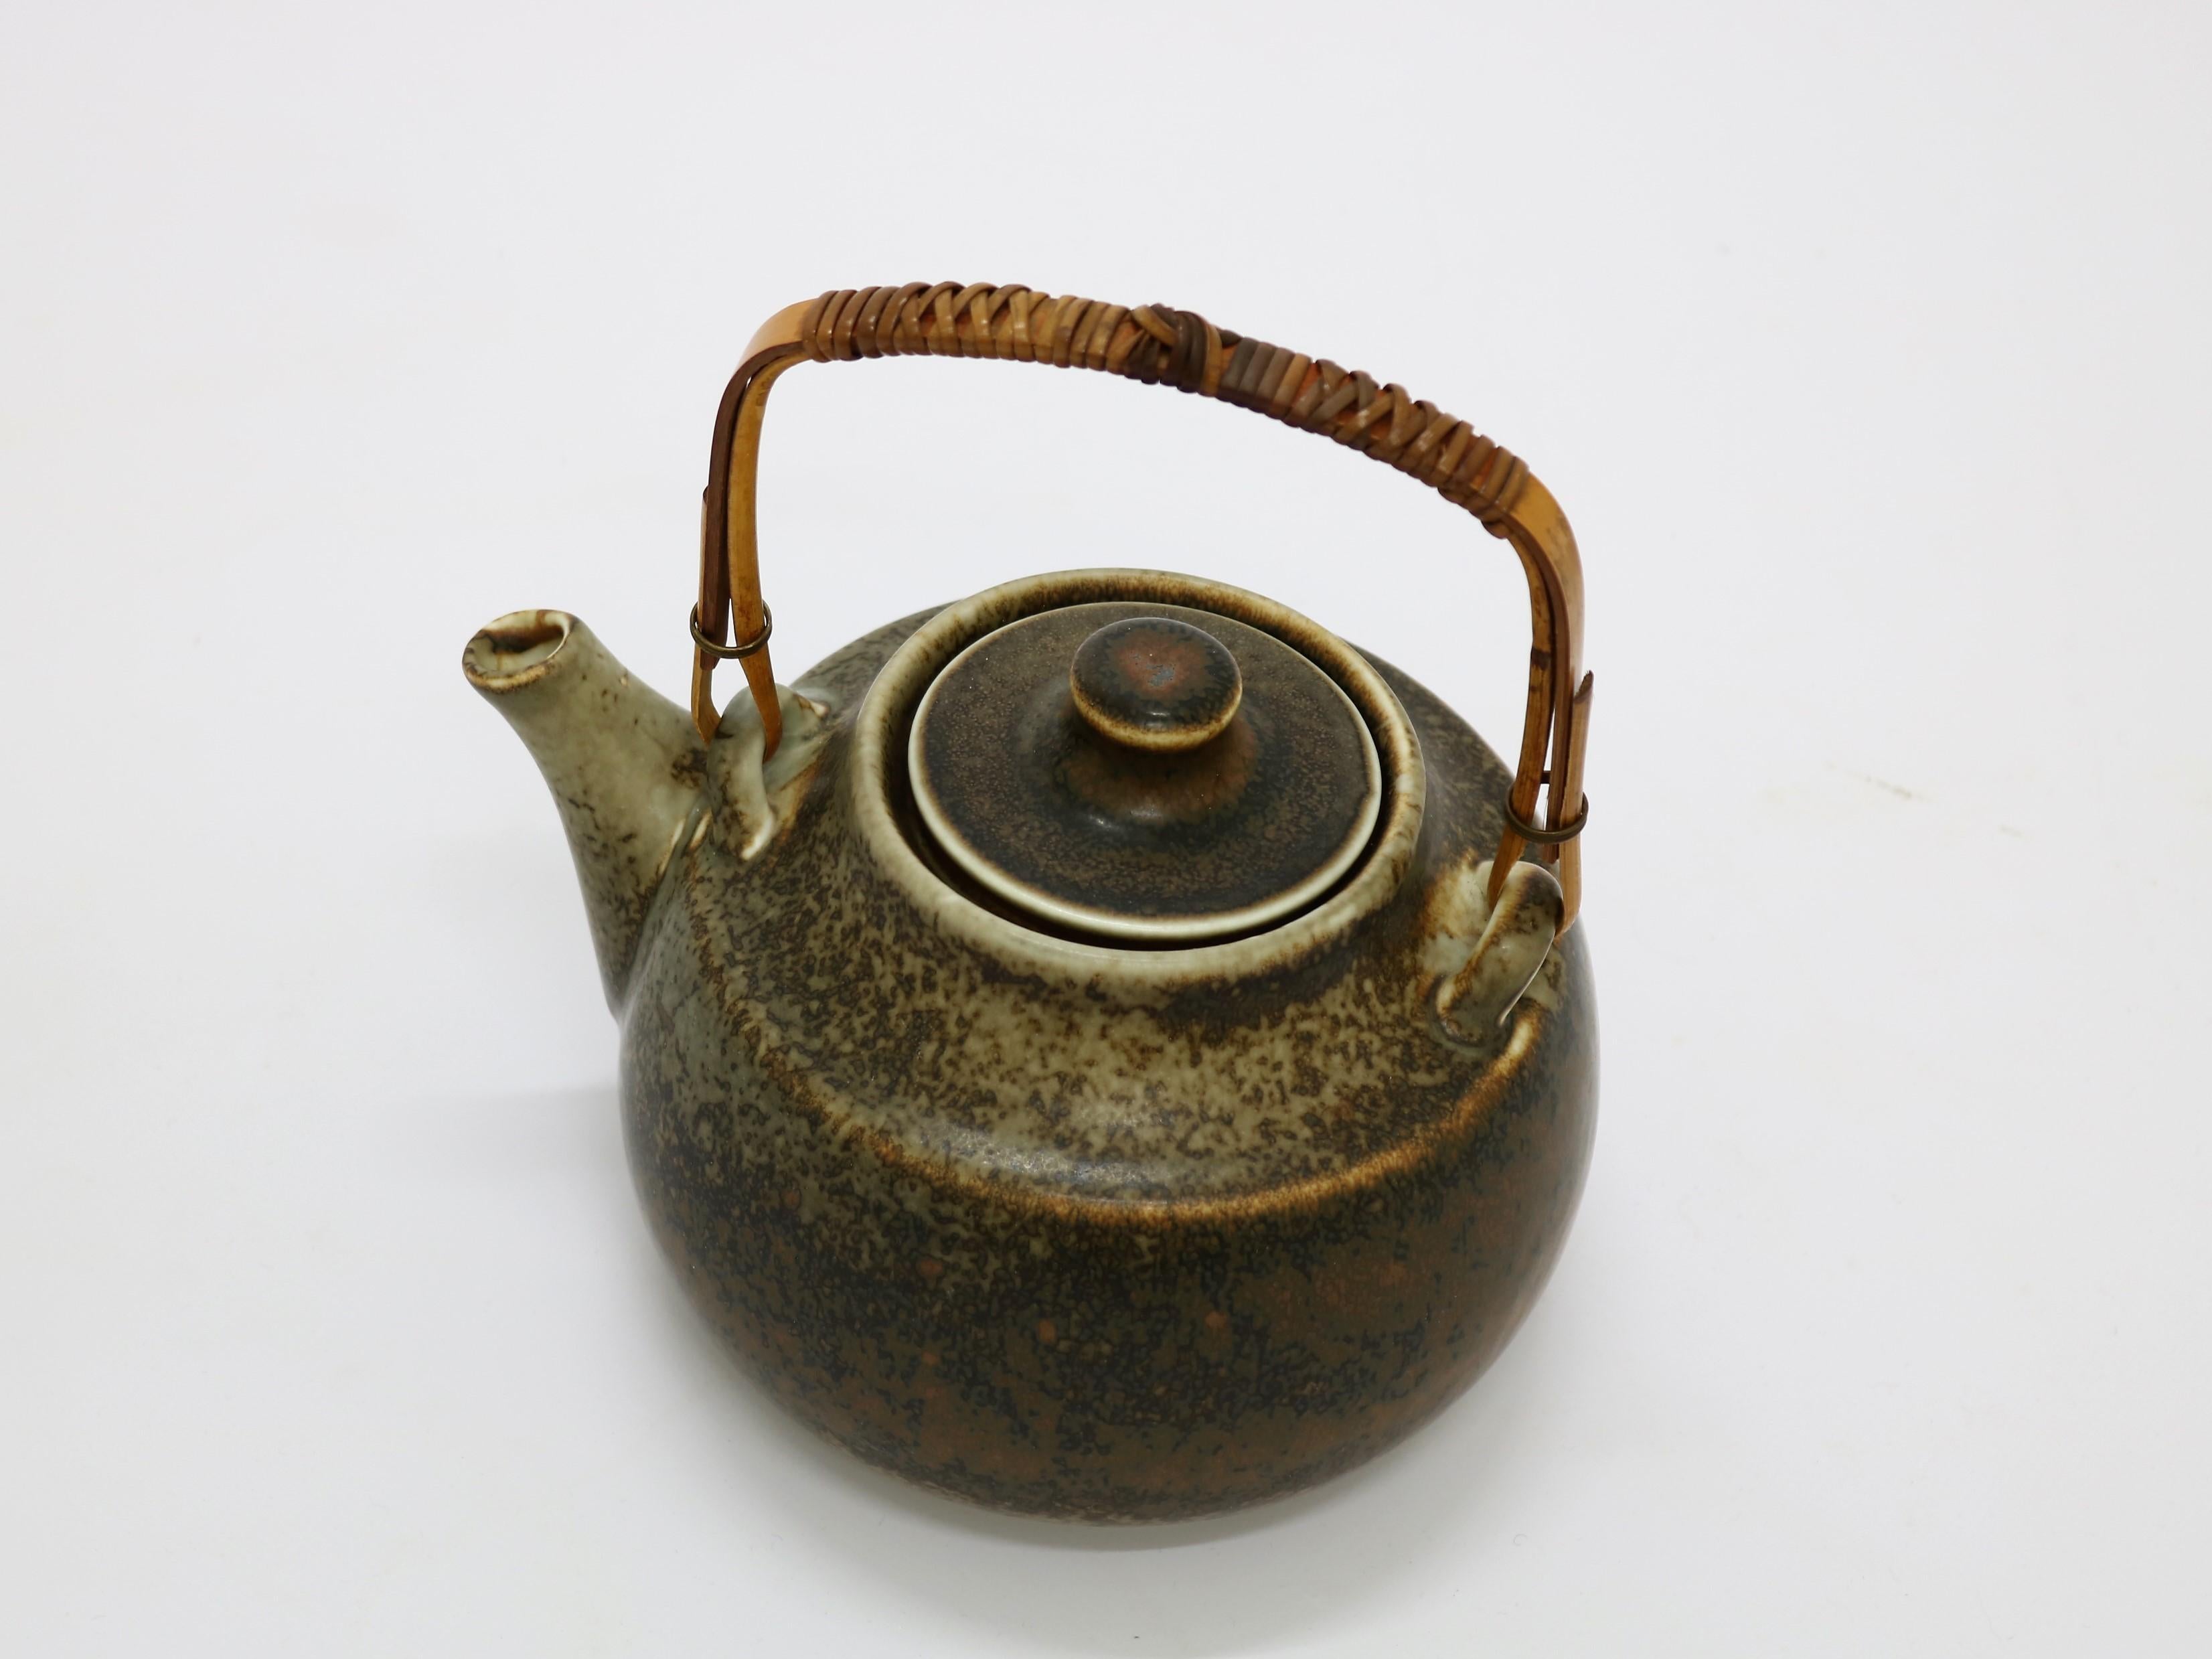 Swedish Carl-Harry Stalhane Stoneware Tea Pot Made at Rörstrand, Sweden in the 1960s